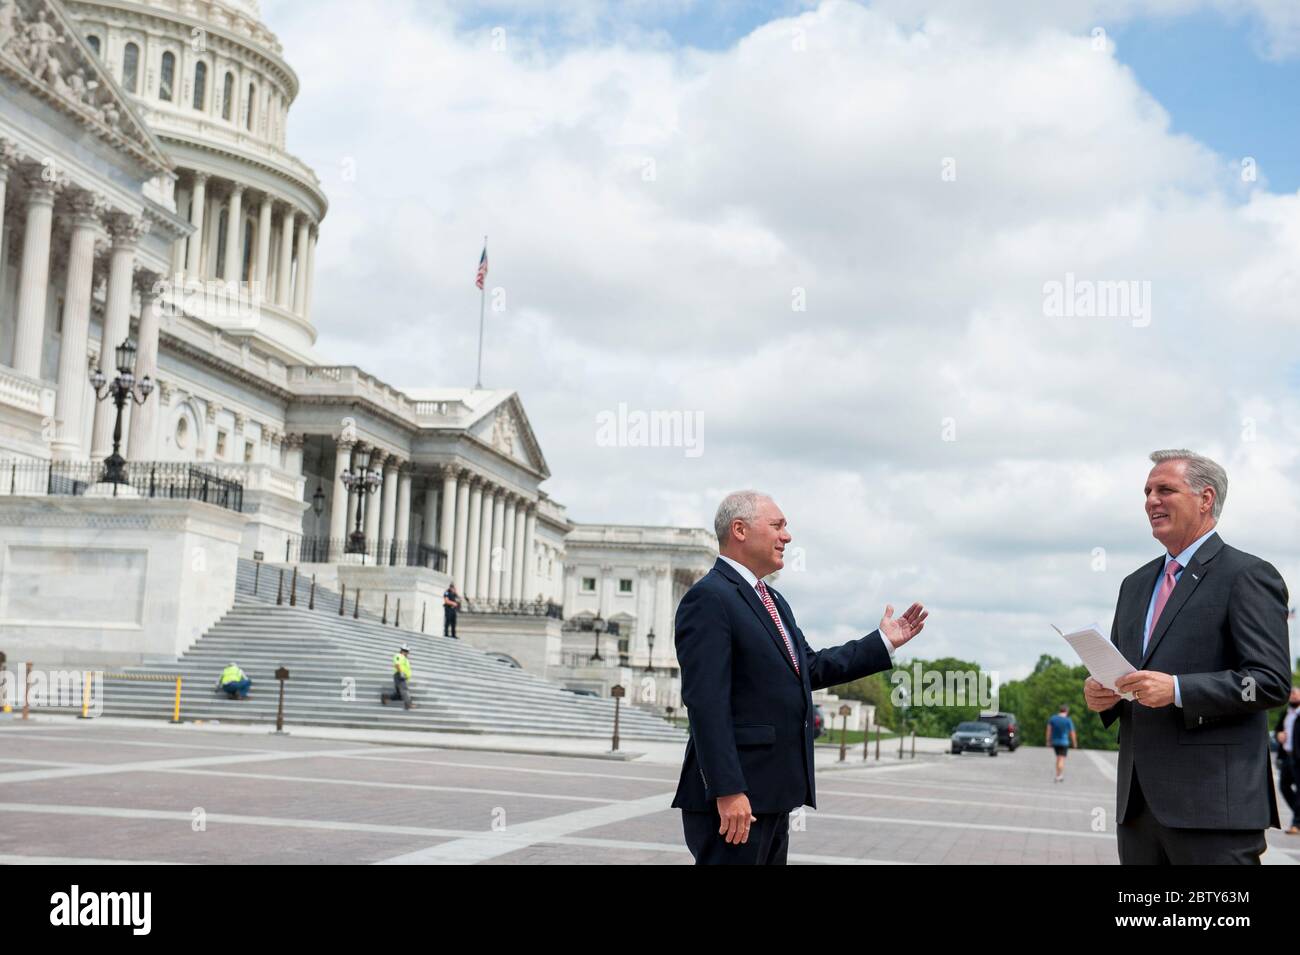 House Minority Leader Rep. Kevin McCarthy (R-Calif., right) chats with House Minority Whip Rep. Steve Scalise (R-LA, left) prior to a media availability to announce that Republican leaders have filed a lawsuit against House Speaker Nancy Pelosi and congressional officials in an effort to block the House of Representatives from using a proxy voting system to allow for remote voting during the coronavirus pandemic, outside of the U.S. Capitol in Washington, DC., Wednesday, May 27, 2020. Credit: Rod Lamkey/CNP /MediaPunch Stock Photo